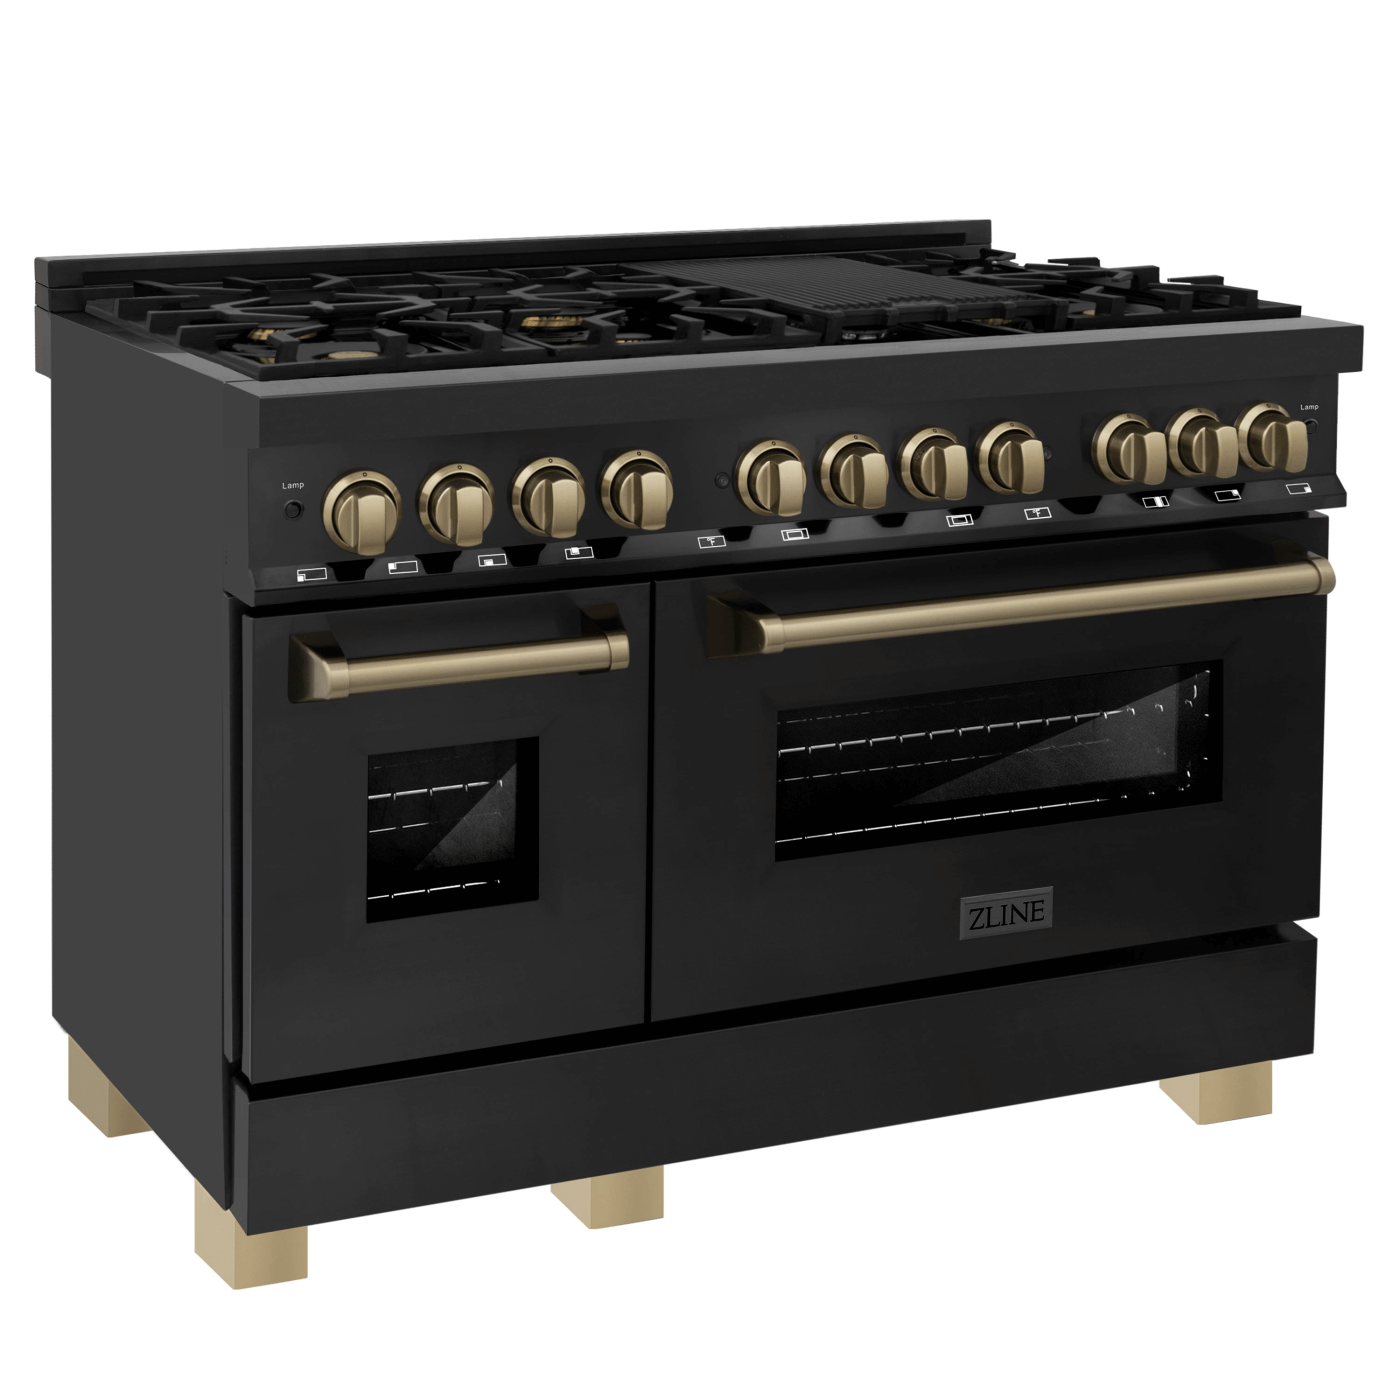 ZLINE Autograph Edition 48 in. 6.0 cu. ft. Dual Fuel Range with Gas Stove and Electric Oven in Black Stainless Steel with Champagne Bronze Accents (RABZ-48-CB) - white background